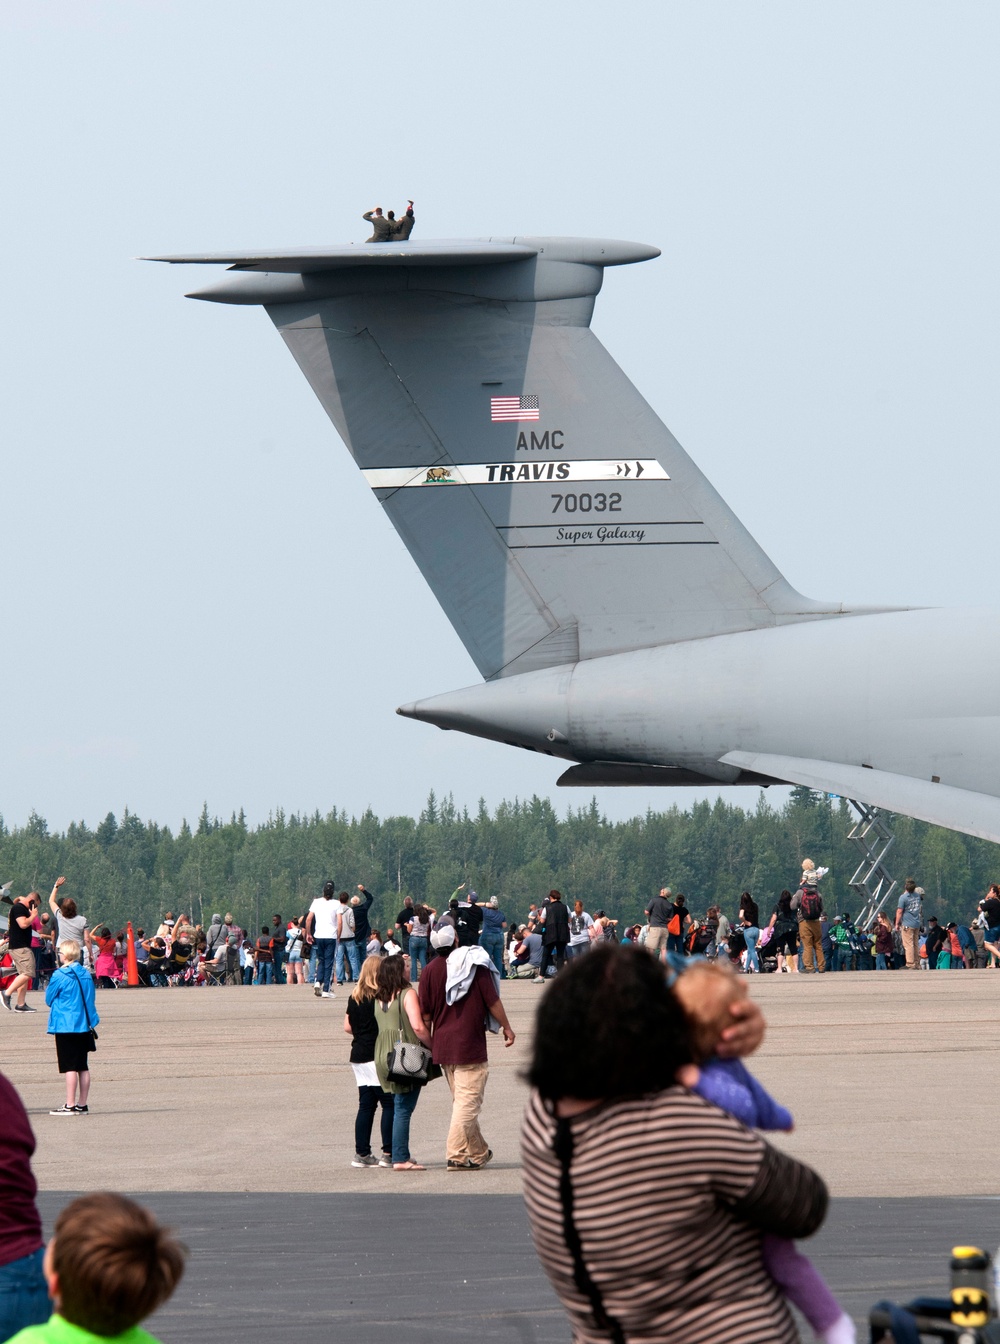 Arctic Lightning airshow brings crowds to Eielson